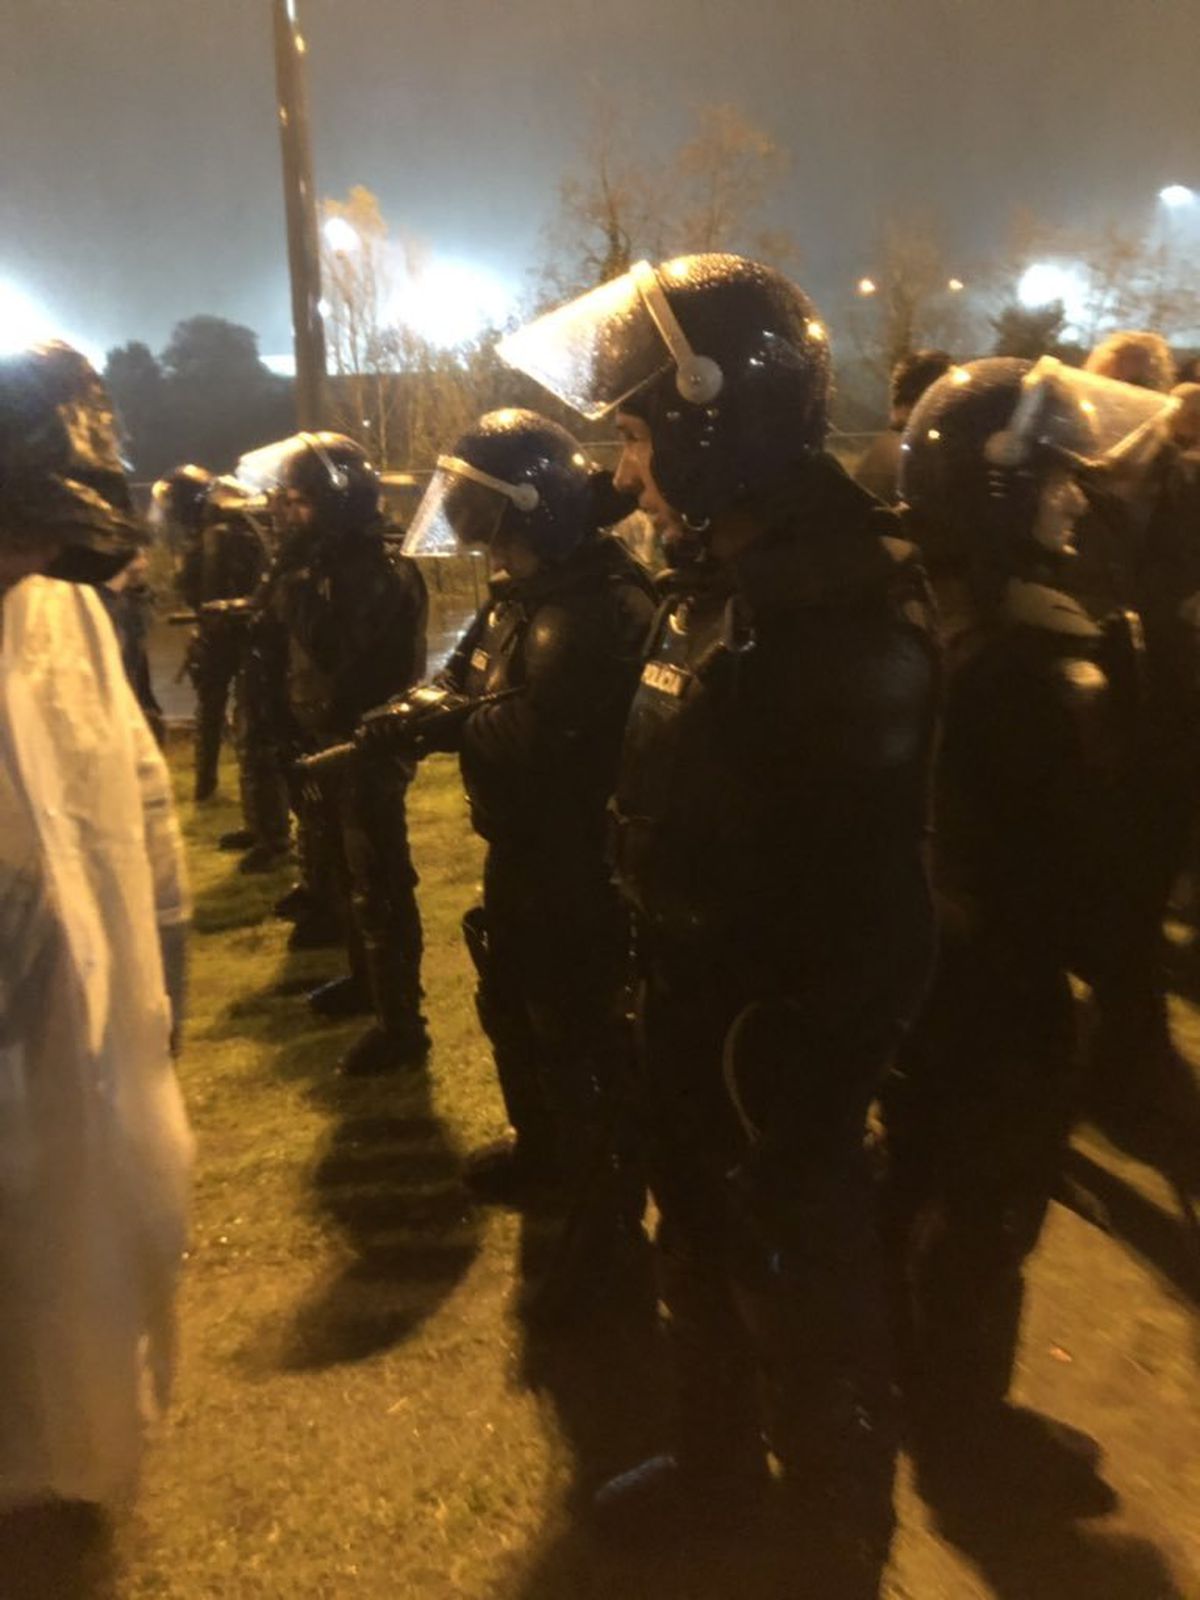 Police dressed in riot gear were herding Wolves fans